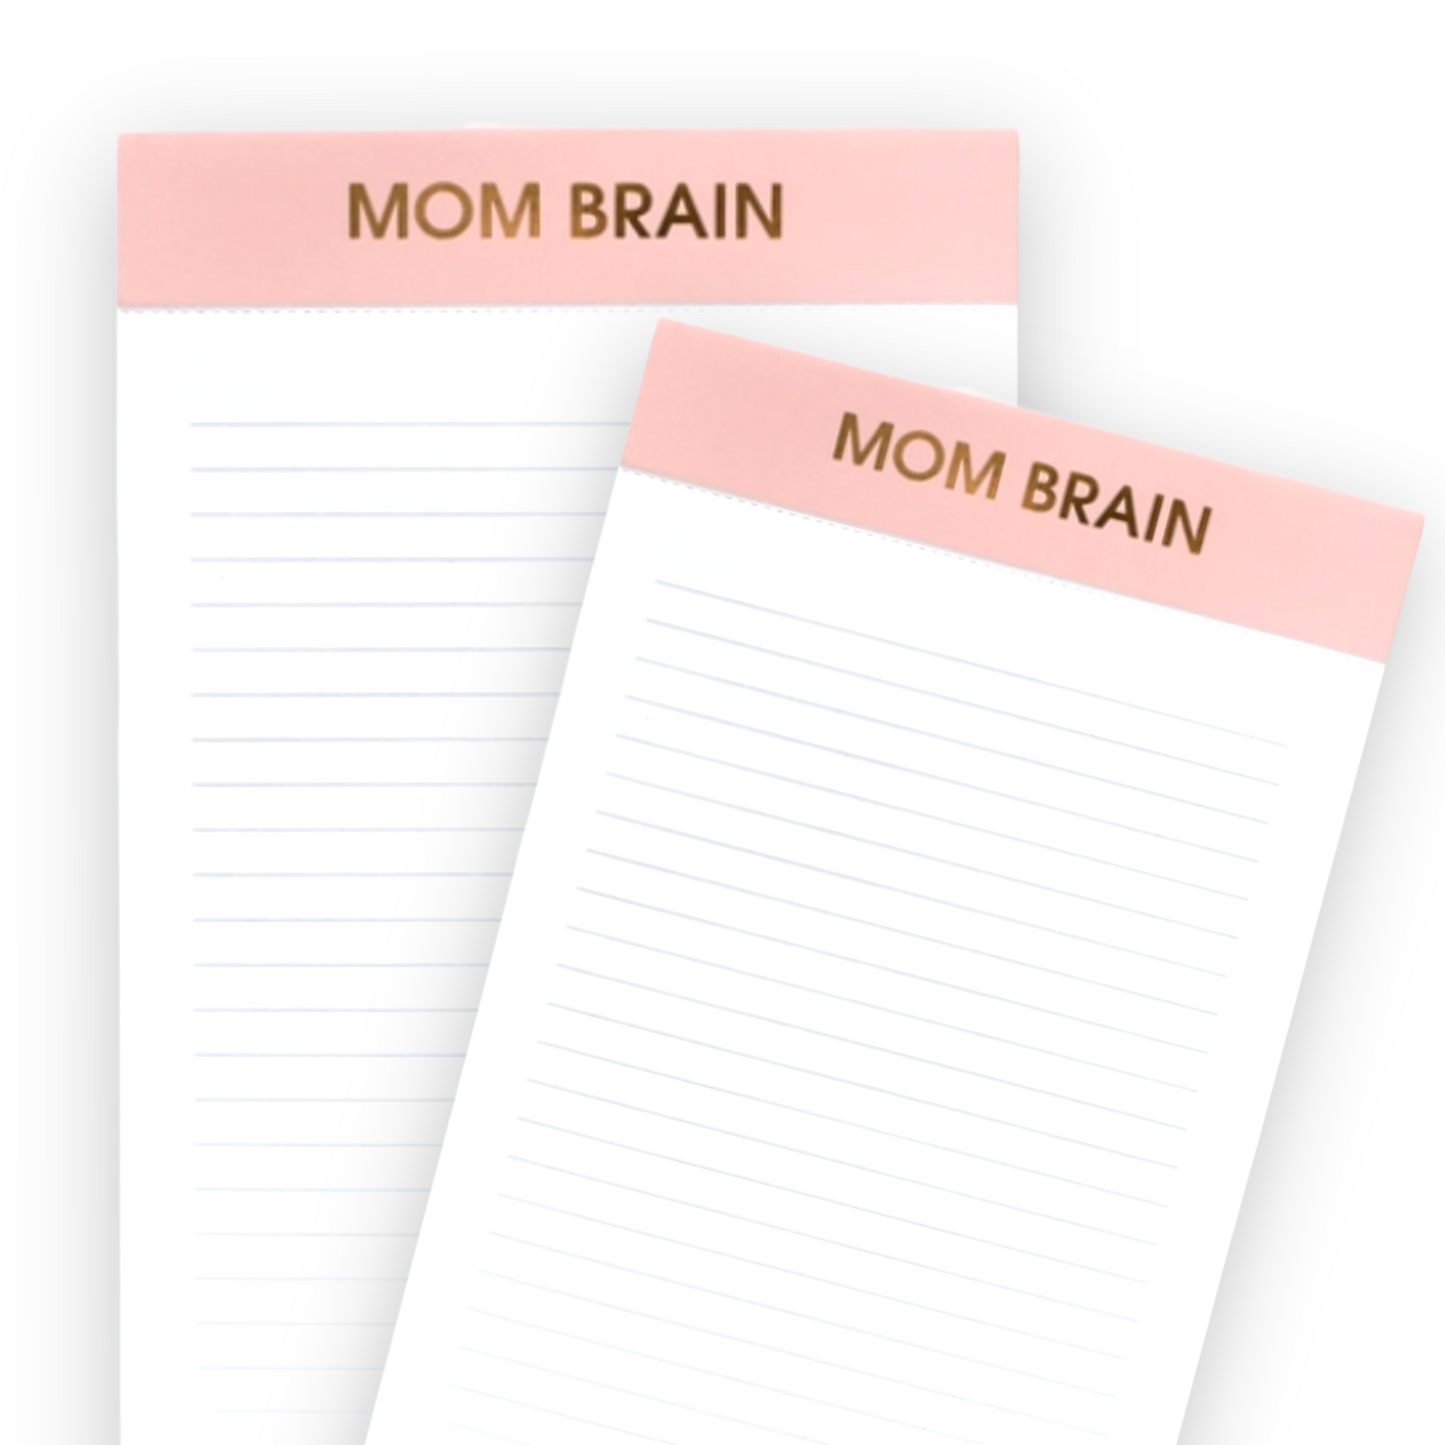 MOM BRAIN NOTEPAD - Curated Home Decor